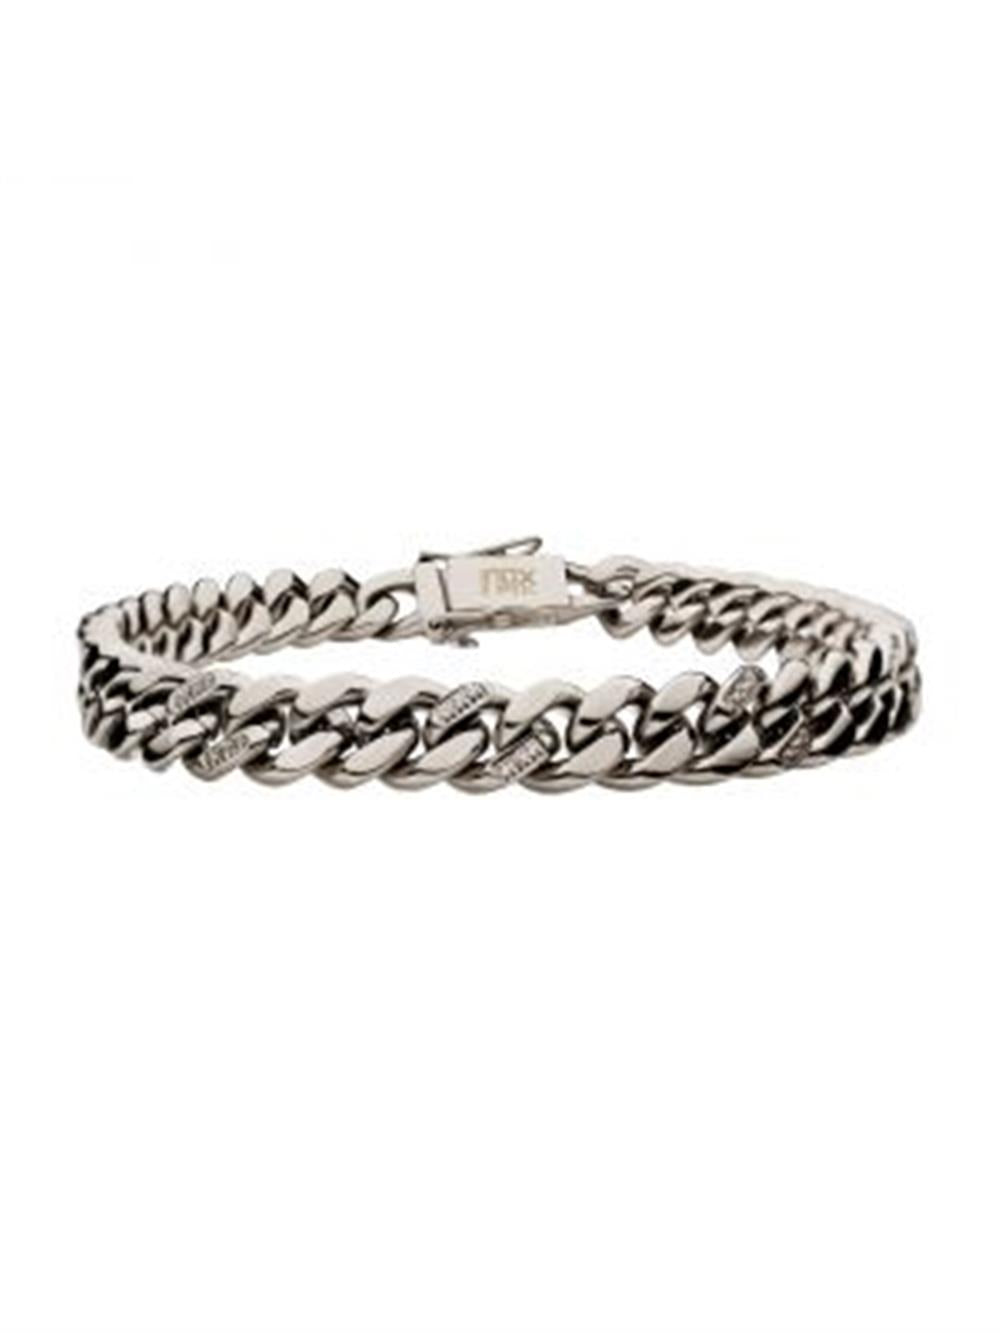 Stainless Steel with 0.15 carat & 30pcs 1mm Diamond Curb Chain Miami Cuban with Box Clasp Bracelet | INOX